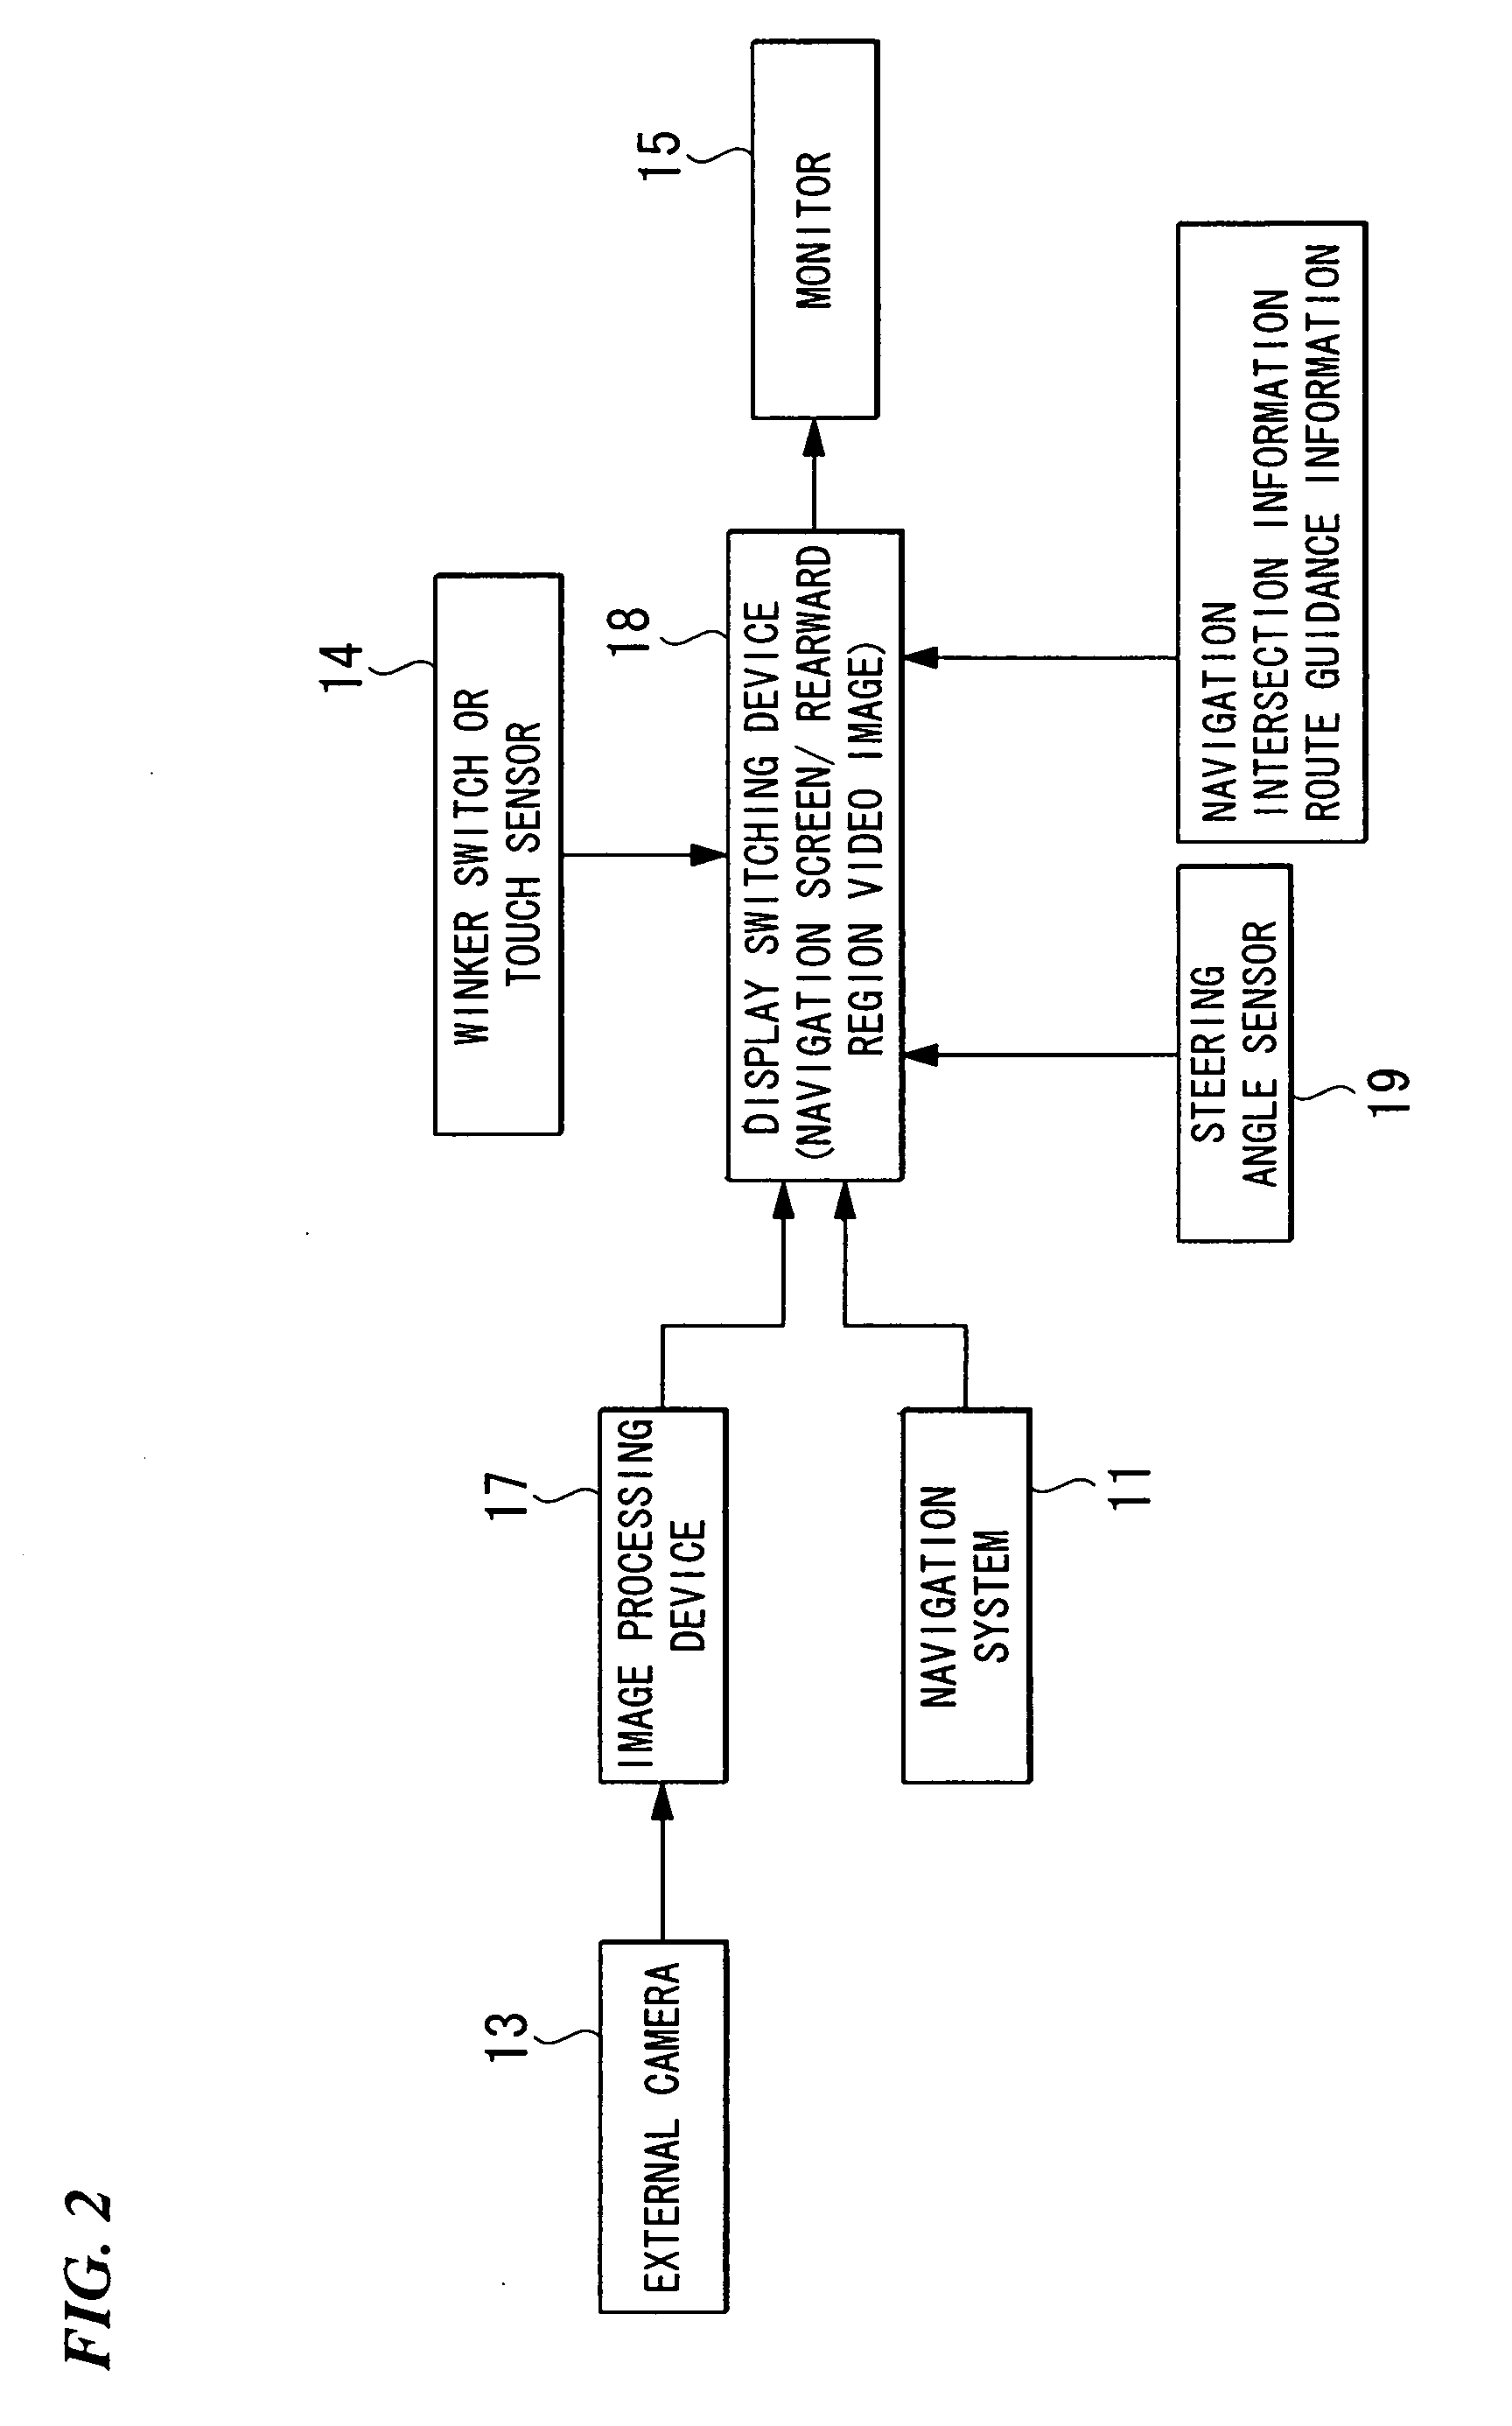 Driving supporting apparatus